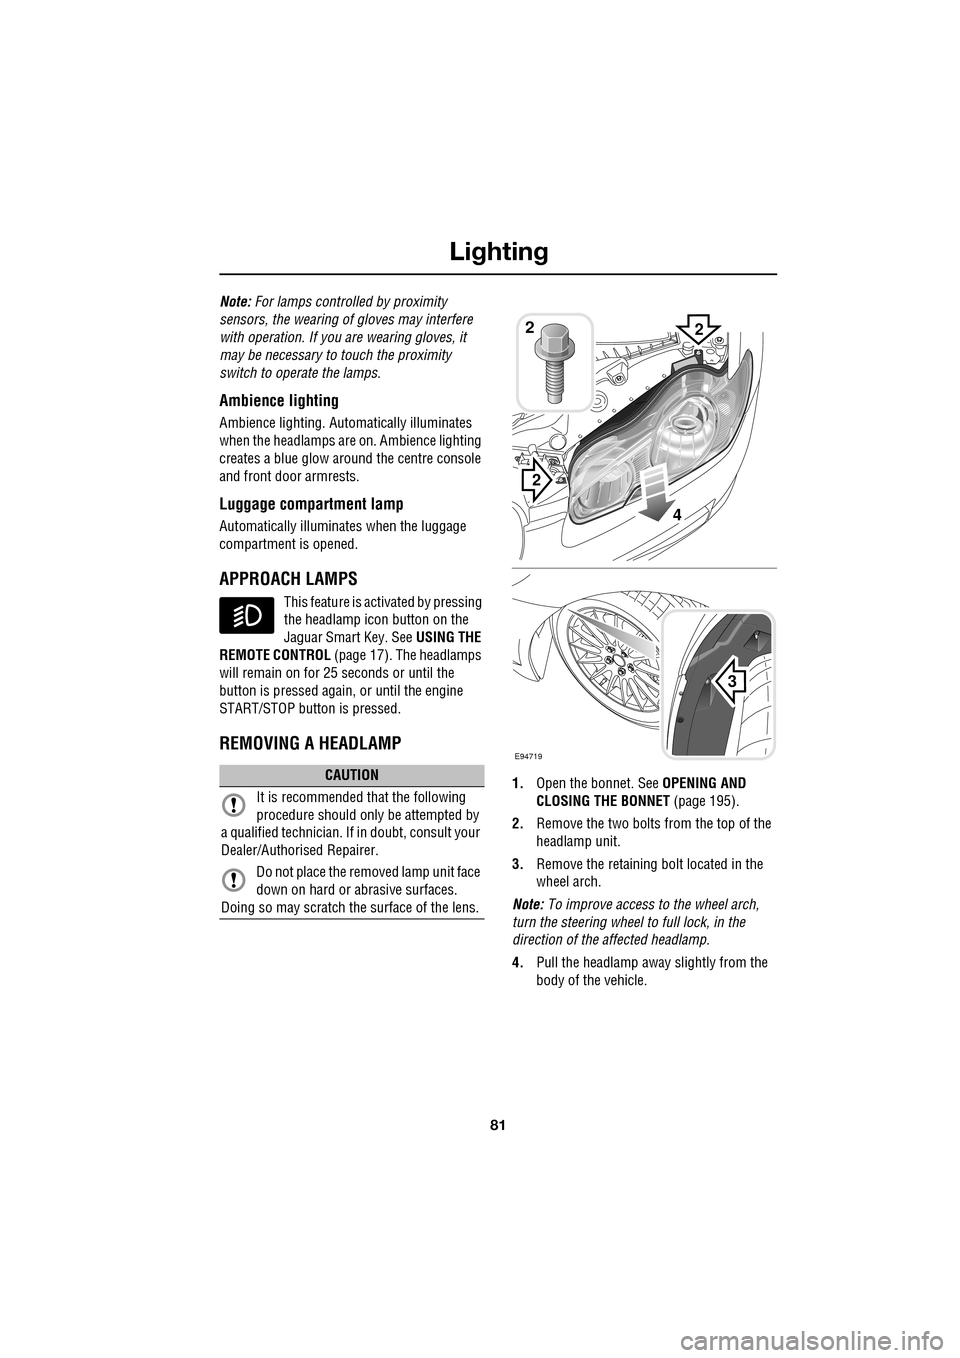 JAGUAR XF 2009 1.G Owners Guide 81
Lighting
               
Note: For lamps controlled by proximity 
sensors, the wearing of gloves may interfere 
with operation. If you  are wearing gloves, it 
may be necessary to  touch the proxim